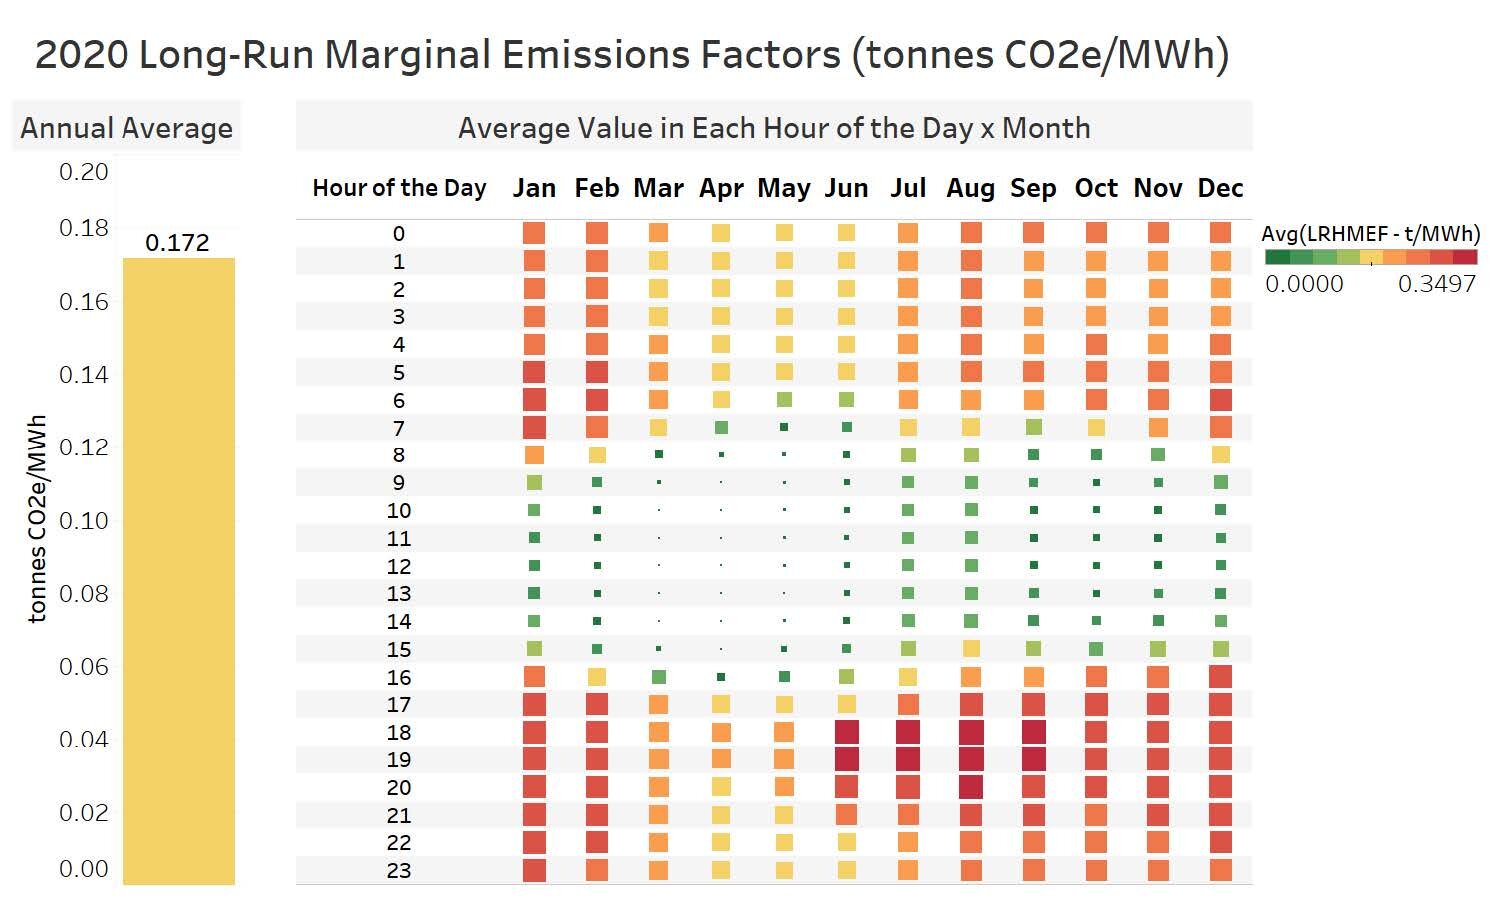  Heat map of emissions factors used for 2020, summarized by the average value in each hour of the day of each month; unweighted annual average shown for reference. 